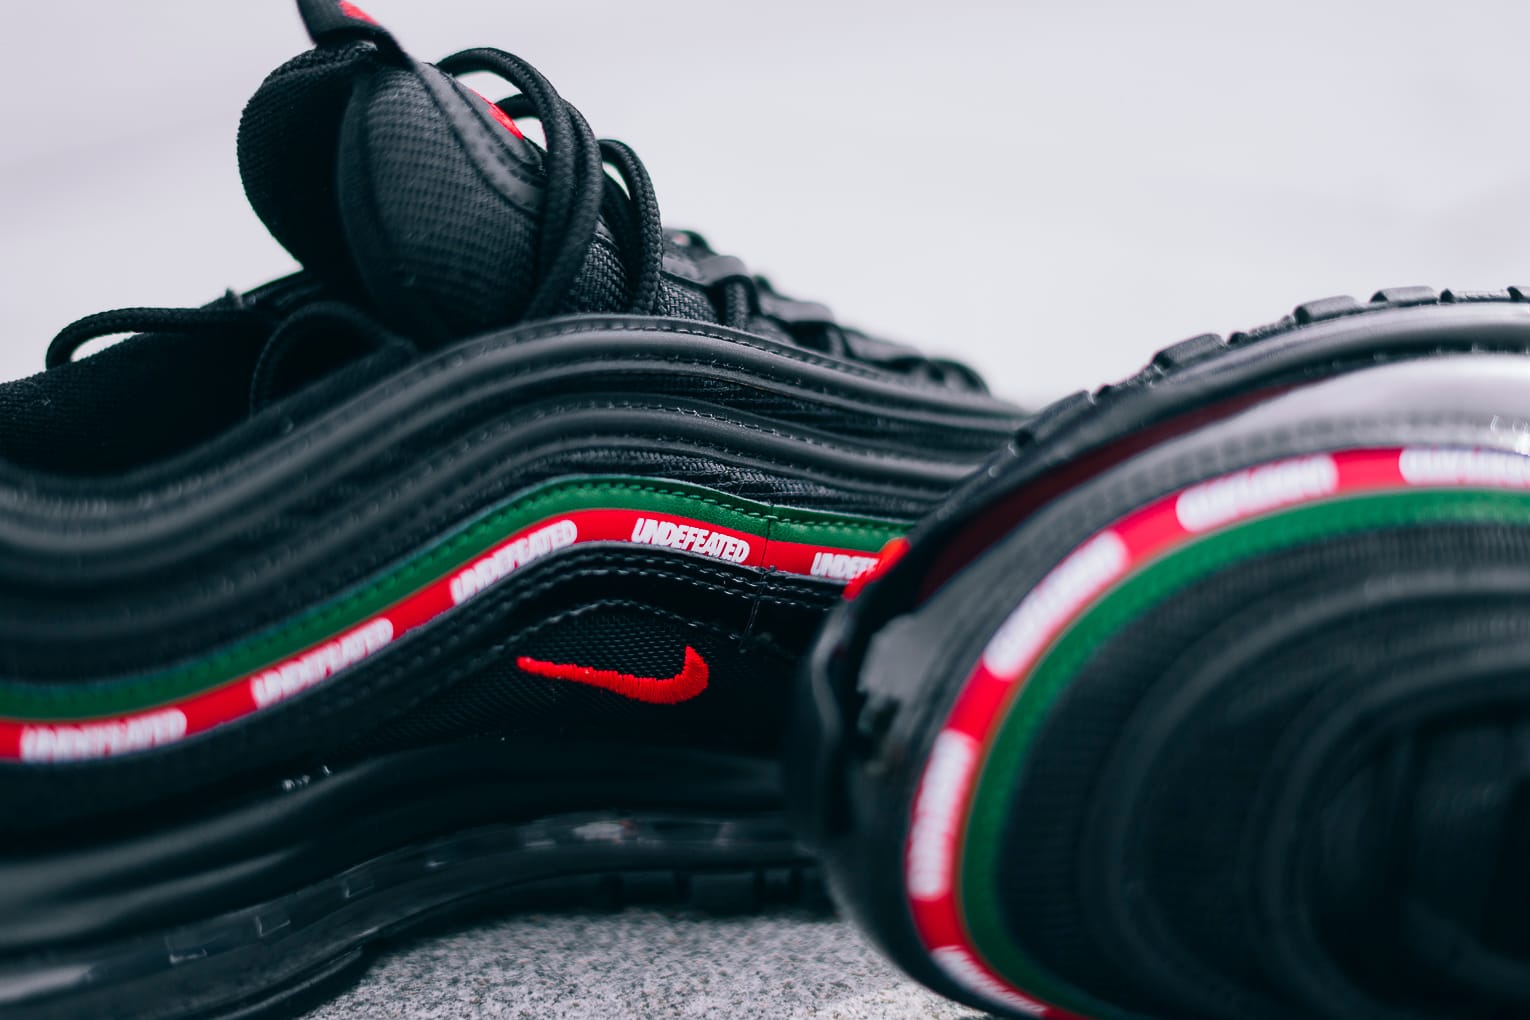 black green and red air max 97